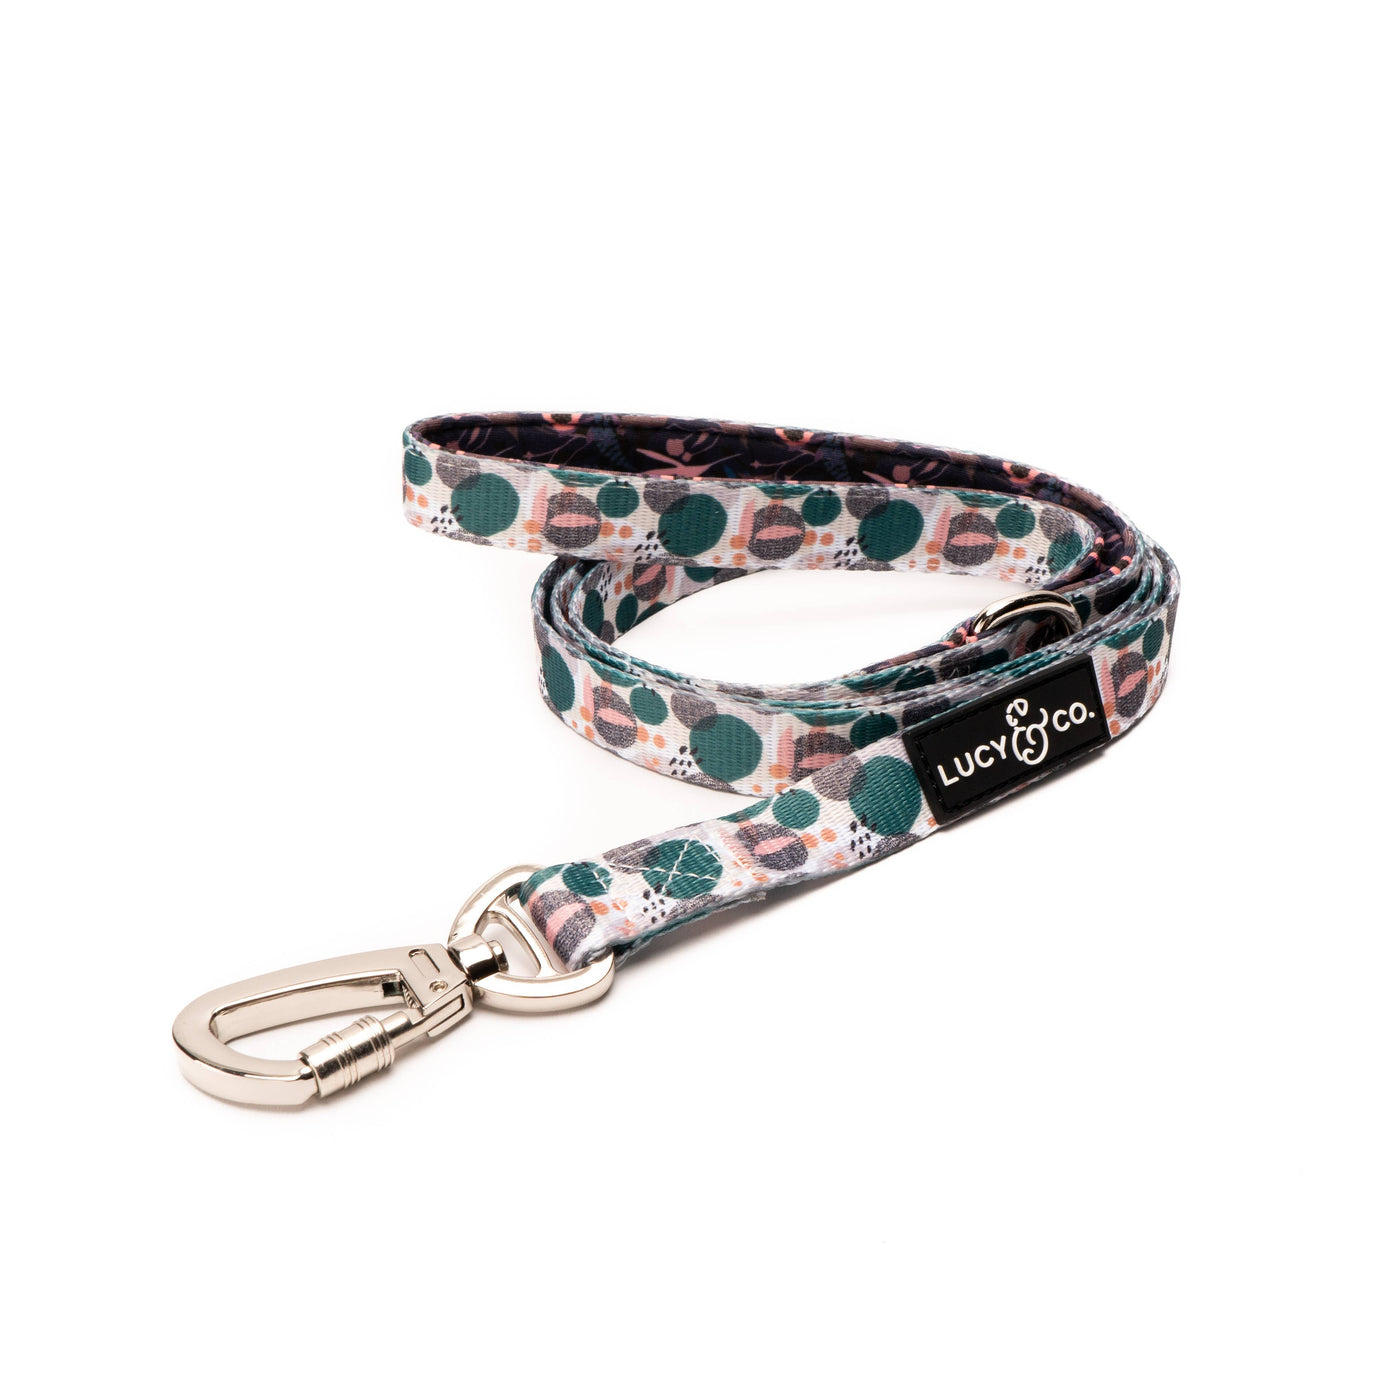 Enchanted Forest Matching Leash - The Lake and Company